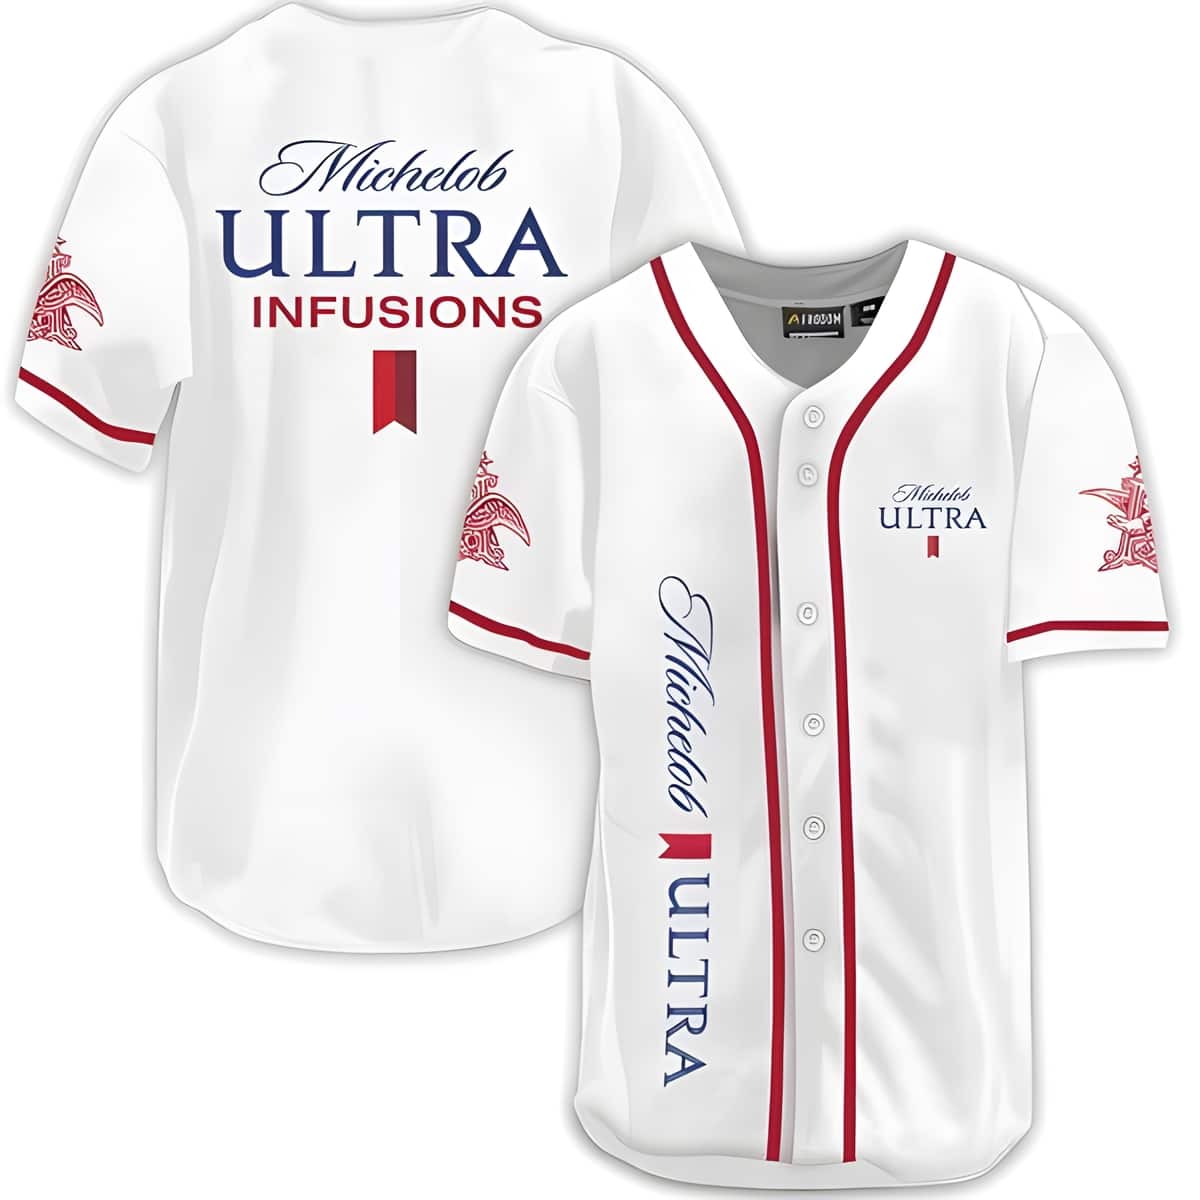 Michelob ULTRA Baseball Jersey Infusions Pomegranate & Agave Light Beer Gift For Brother